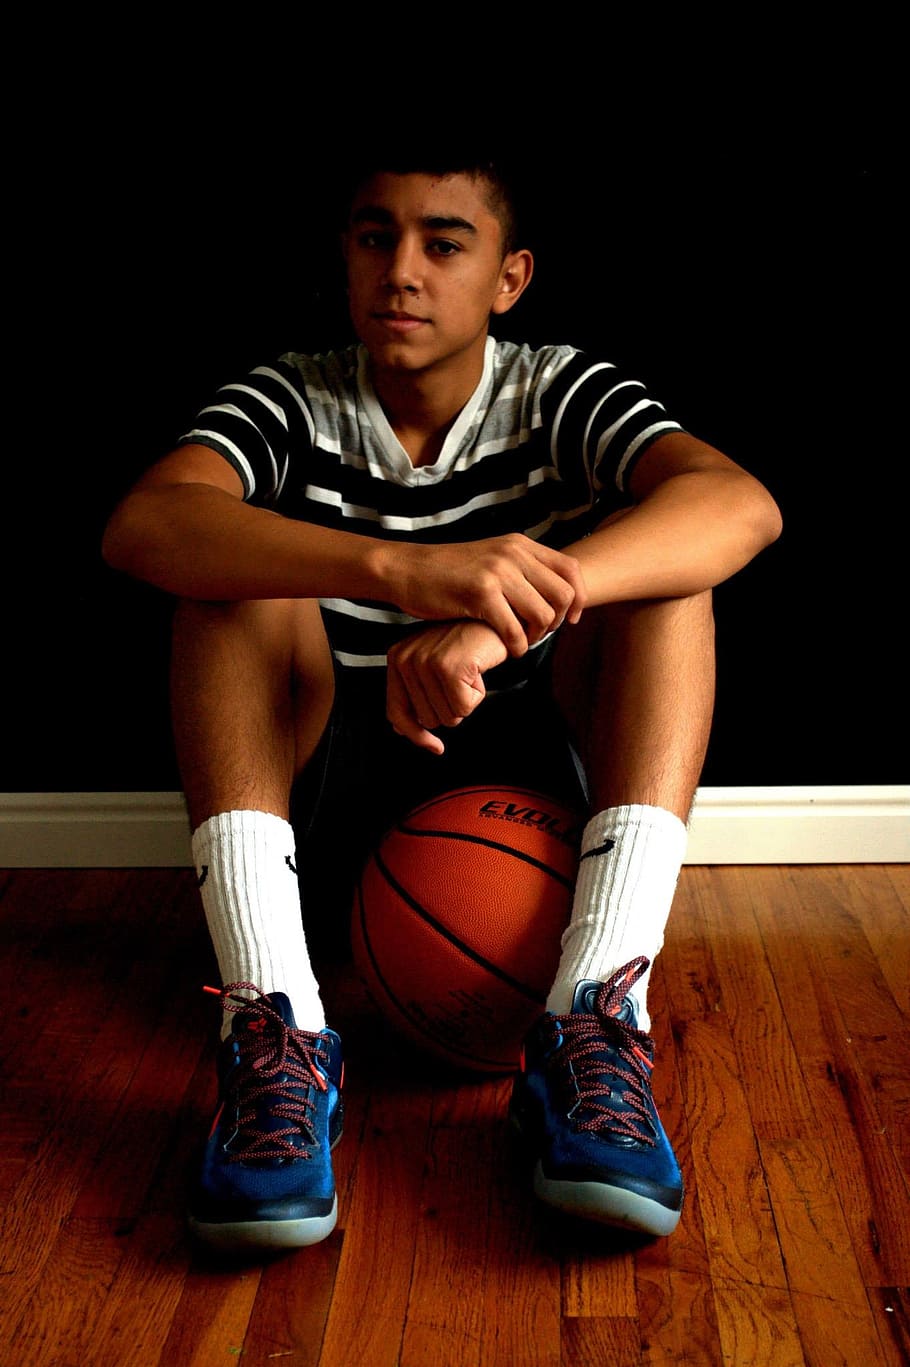 HD wallpaper: boy sitting on floor with basketball, latino, back to school ...